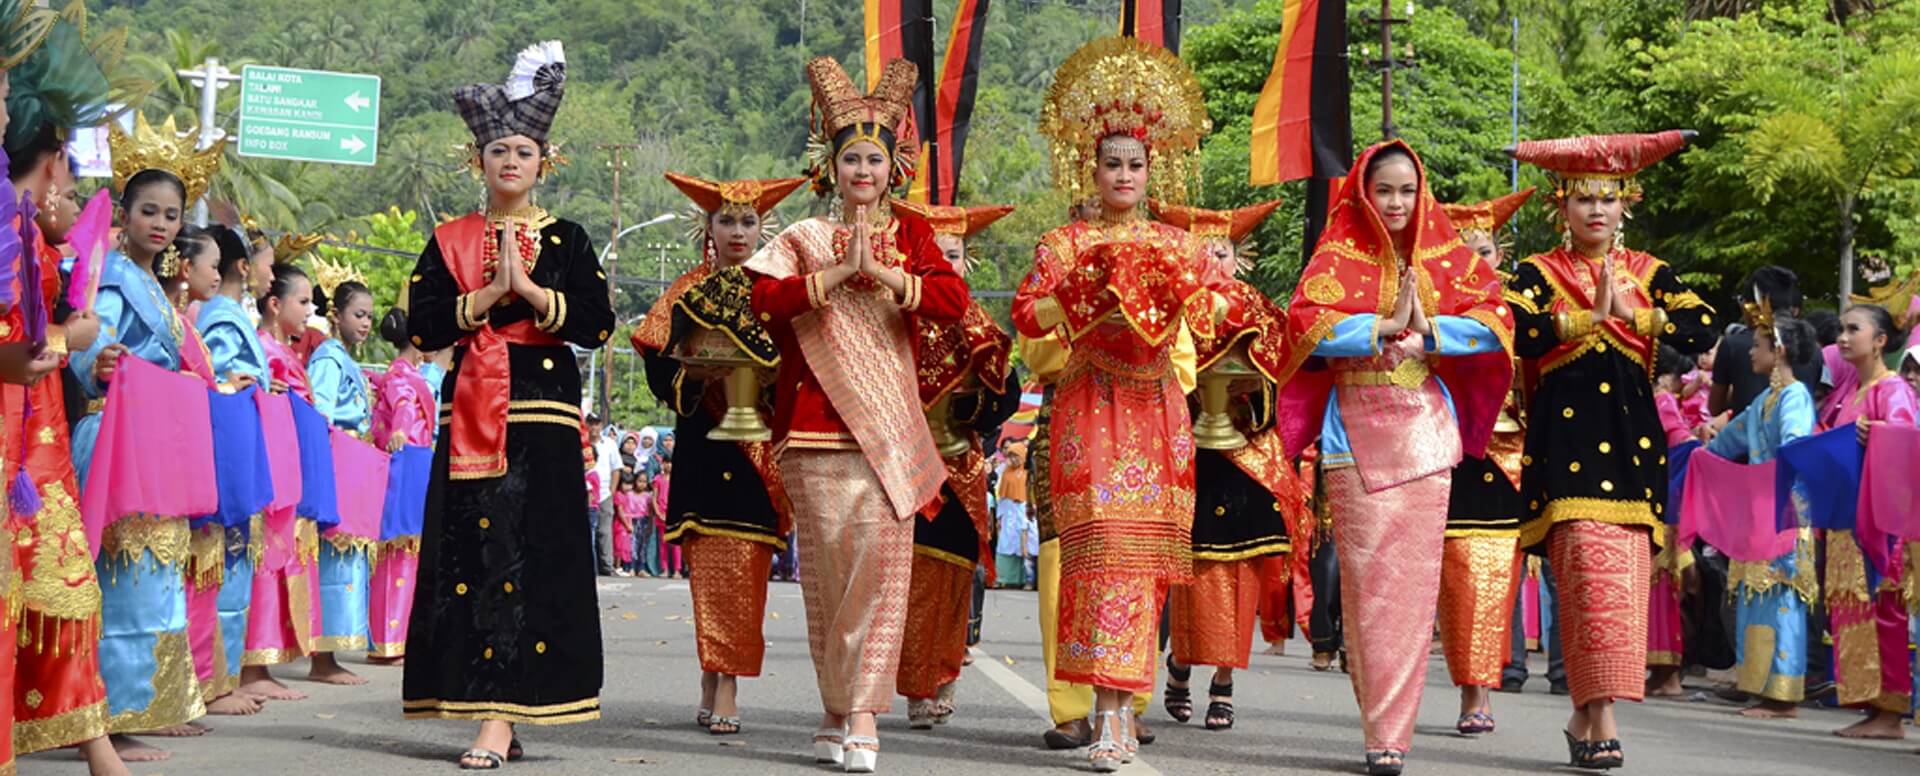 Culture and Tradition in Indonesia - Indonesia